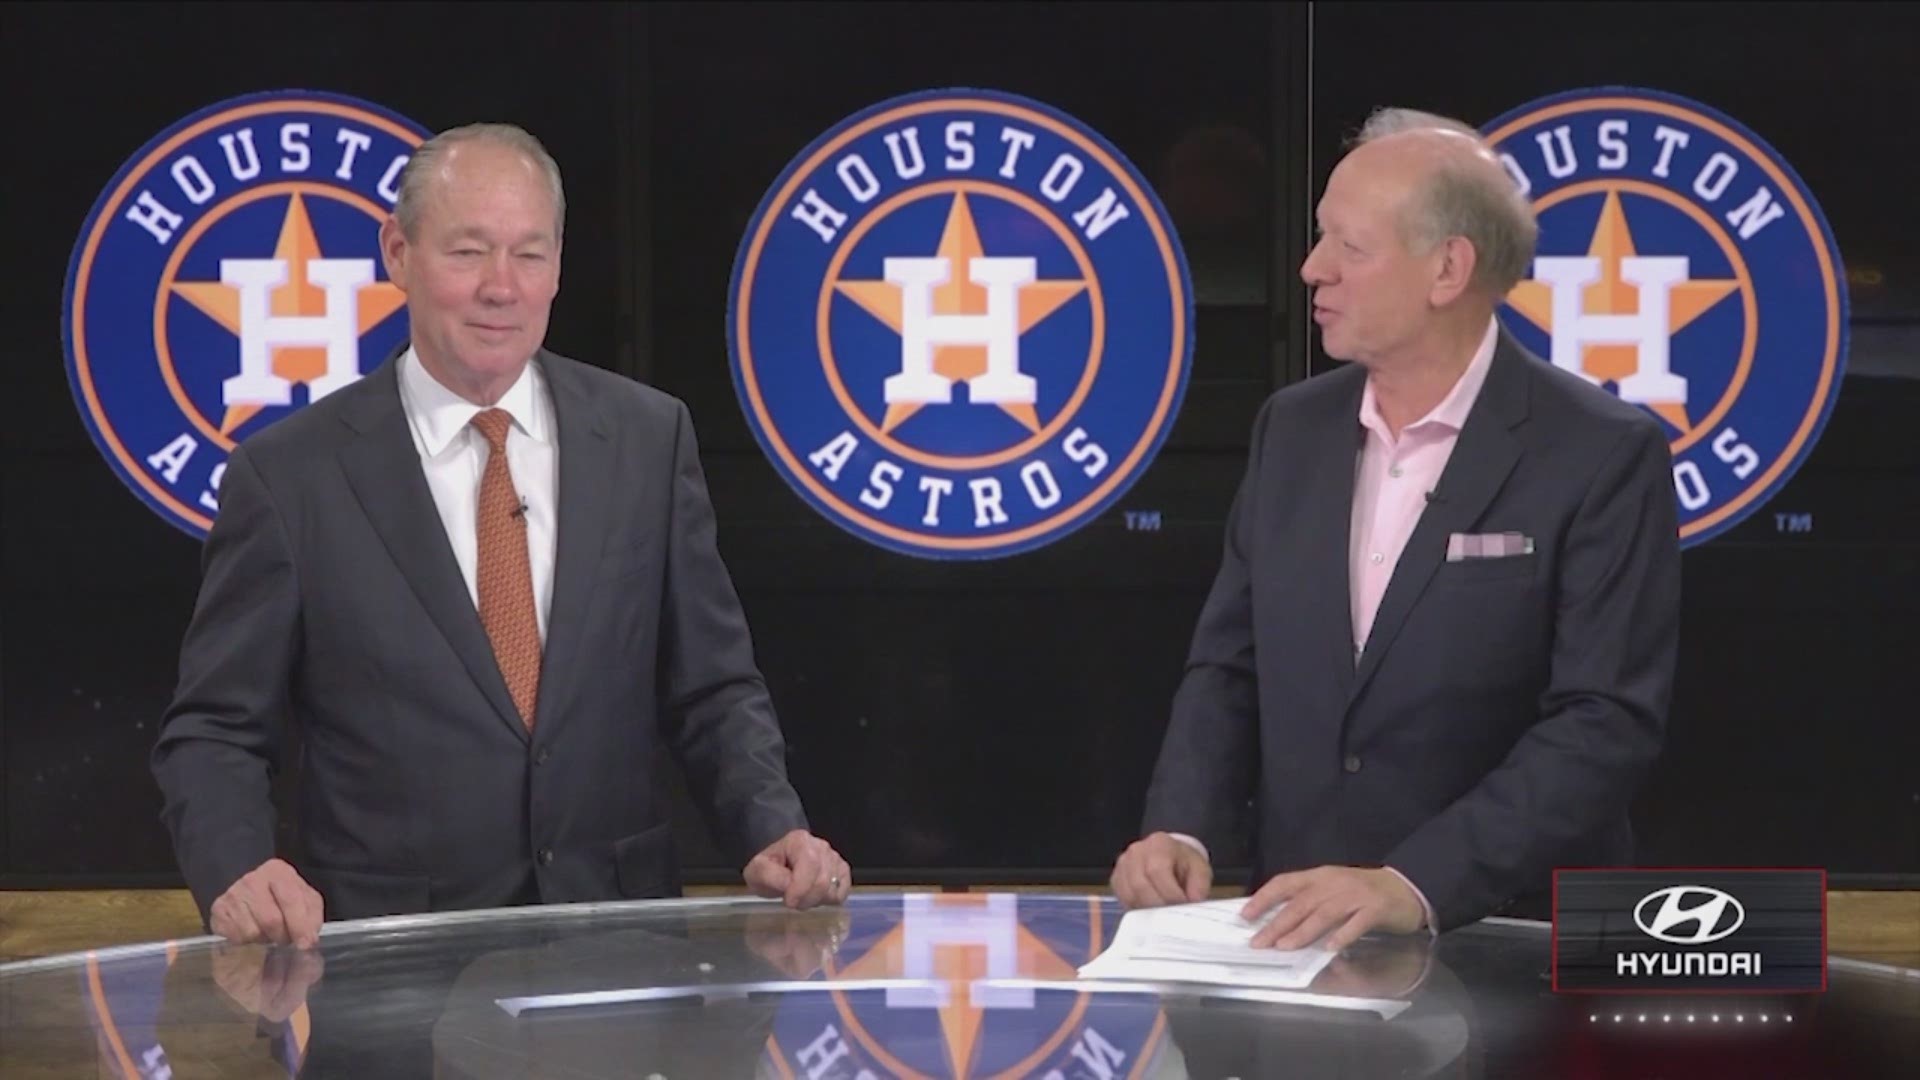 Houston Astros Owner Jim Crane stopped by Sports Extra to talk about the team's postseason berth.